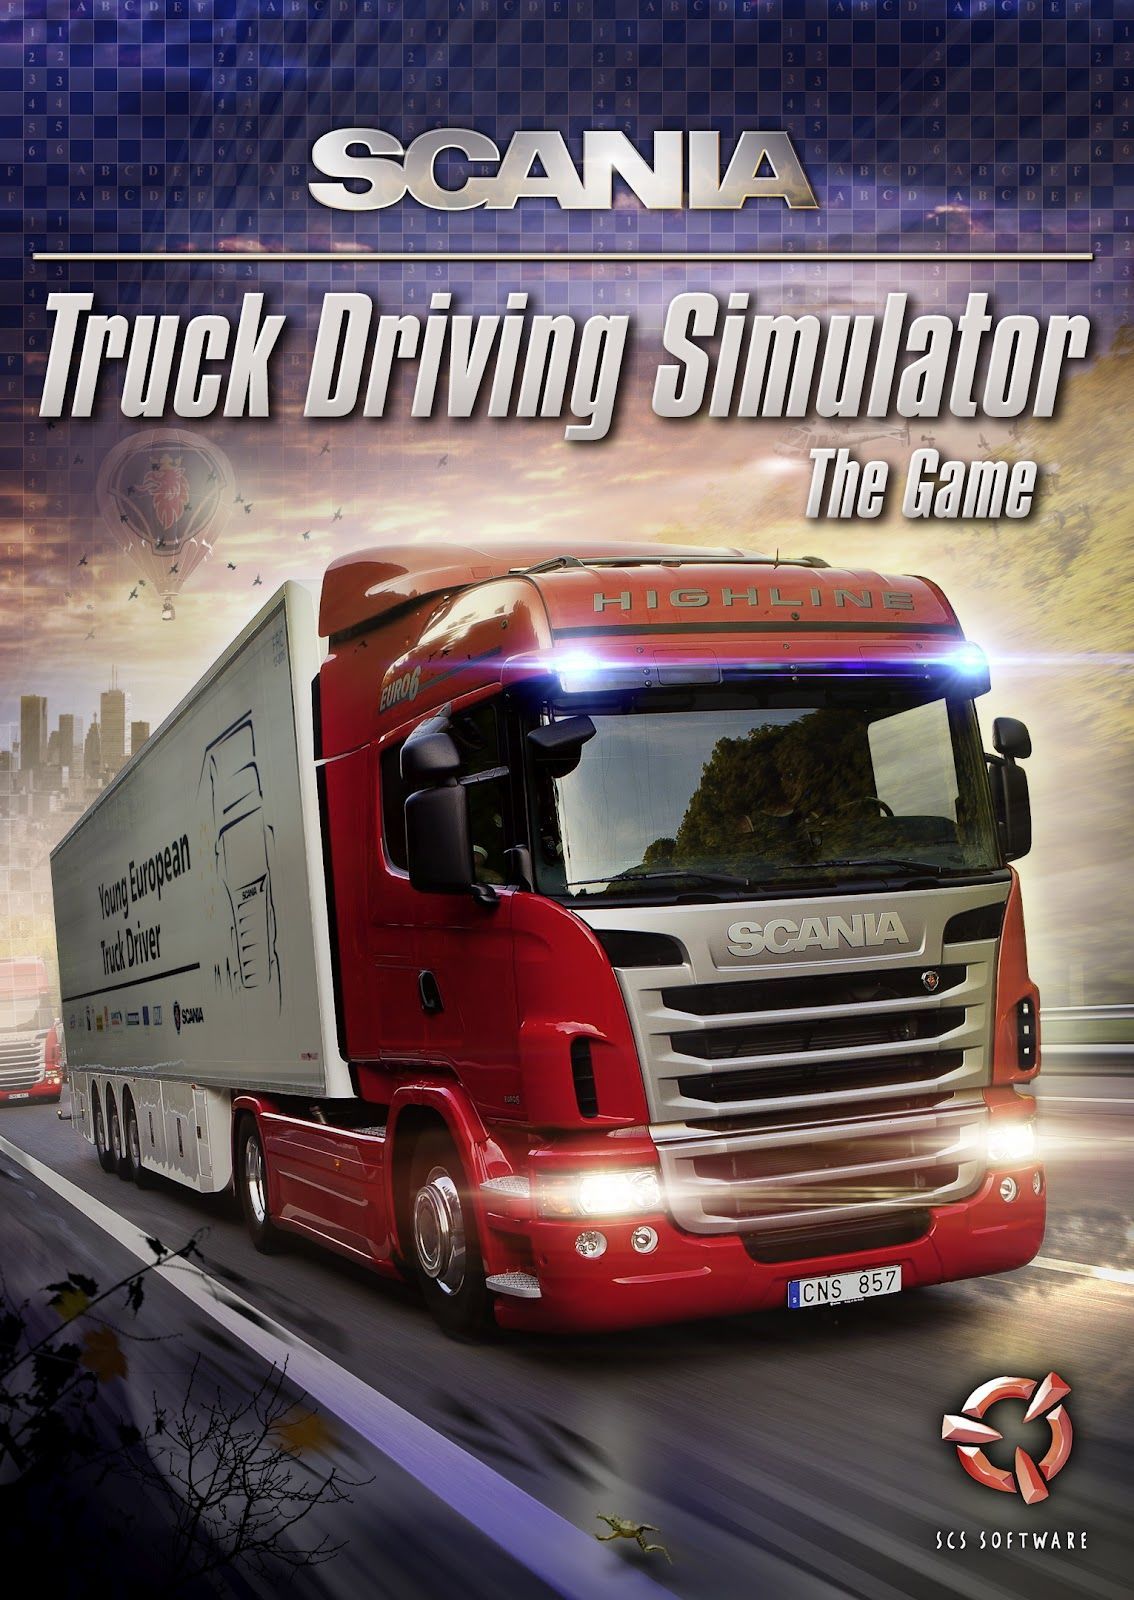 usa car simulator for pc download game driving